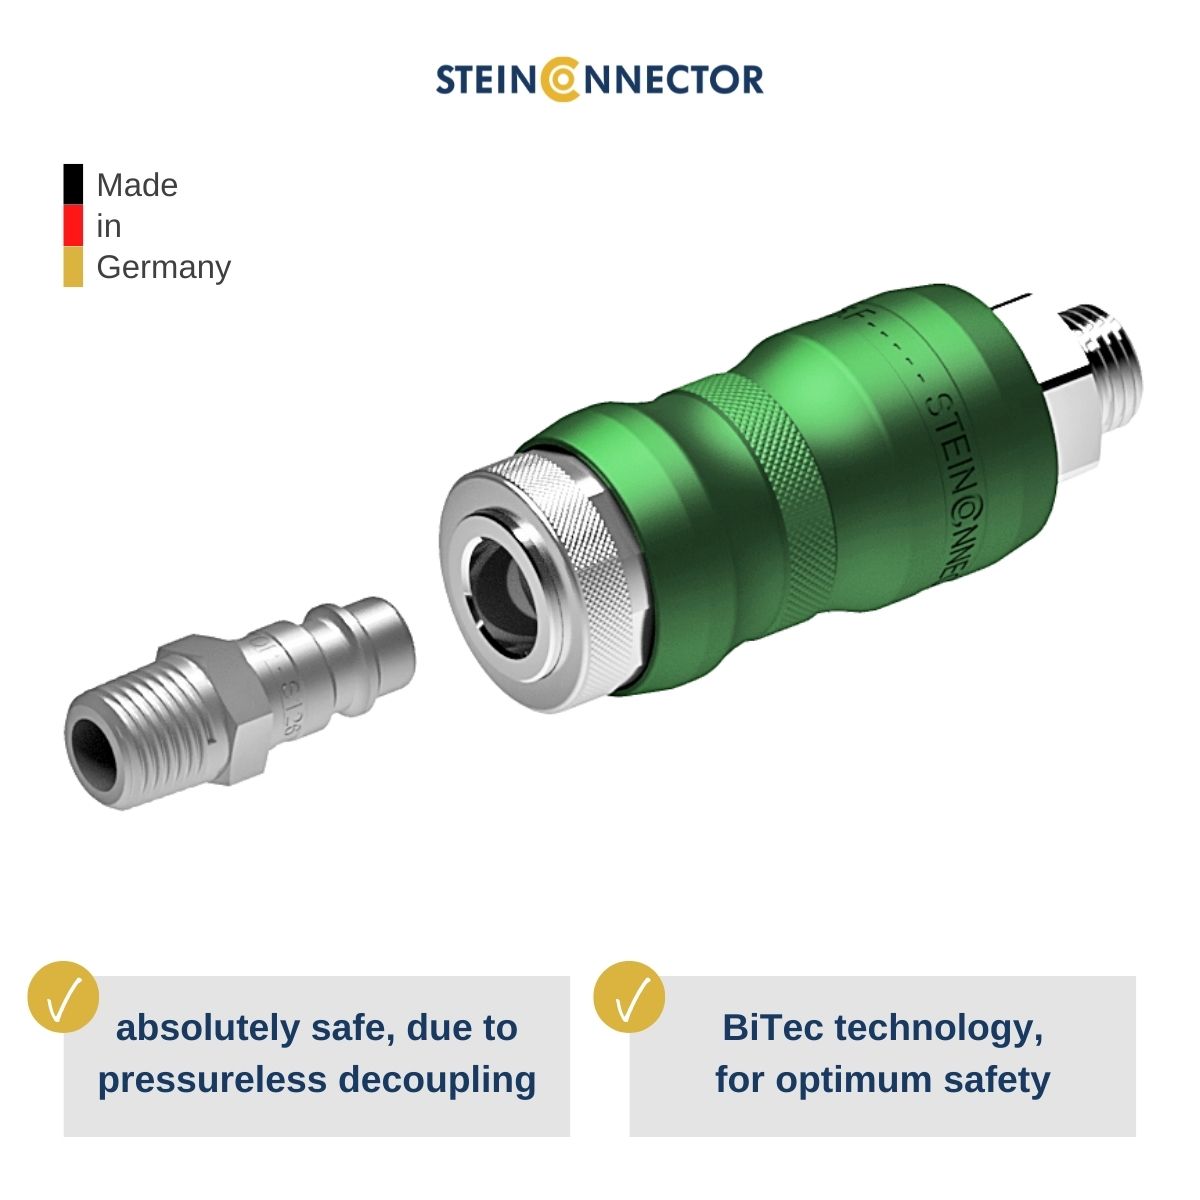 Steinconnector medical couplings for the medical sector - free 3D CAD models in IGES, STEP, DXF & many file formats - safety couplings & dry couplings especially for medical devices